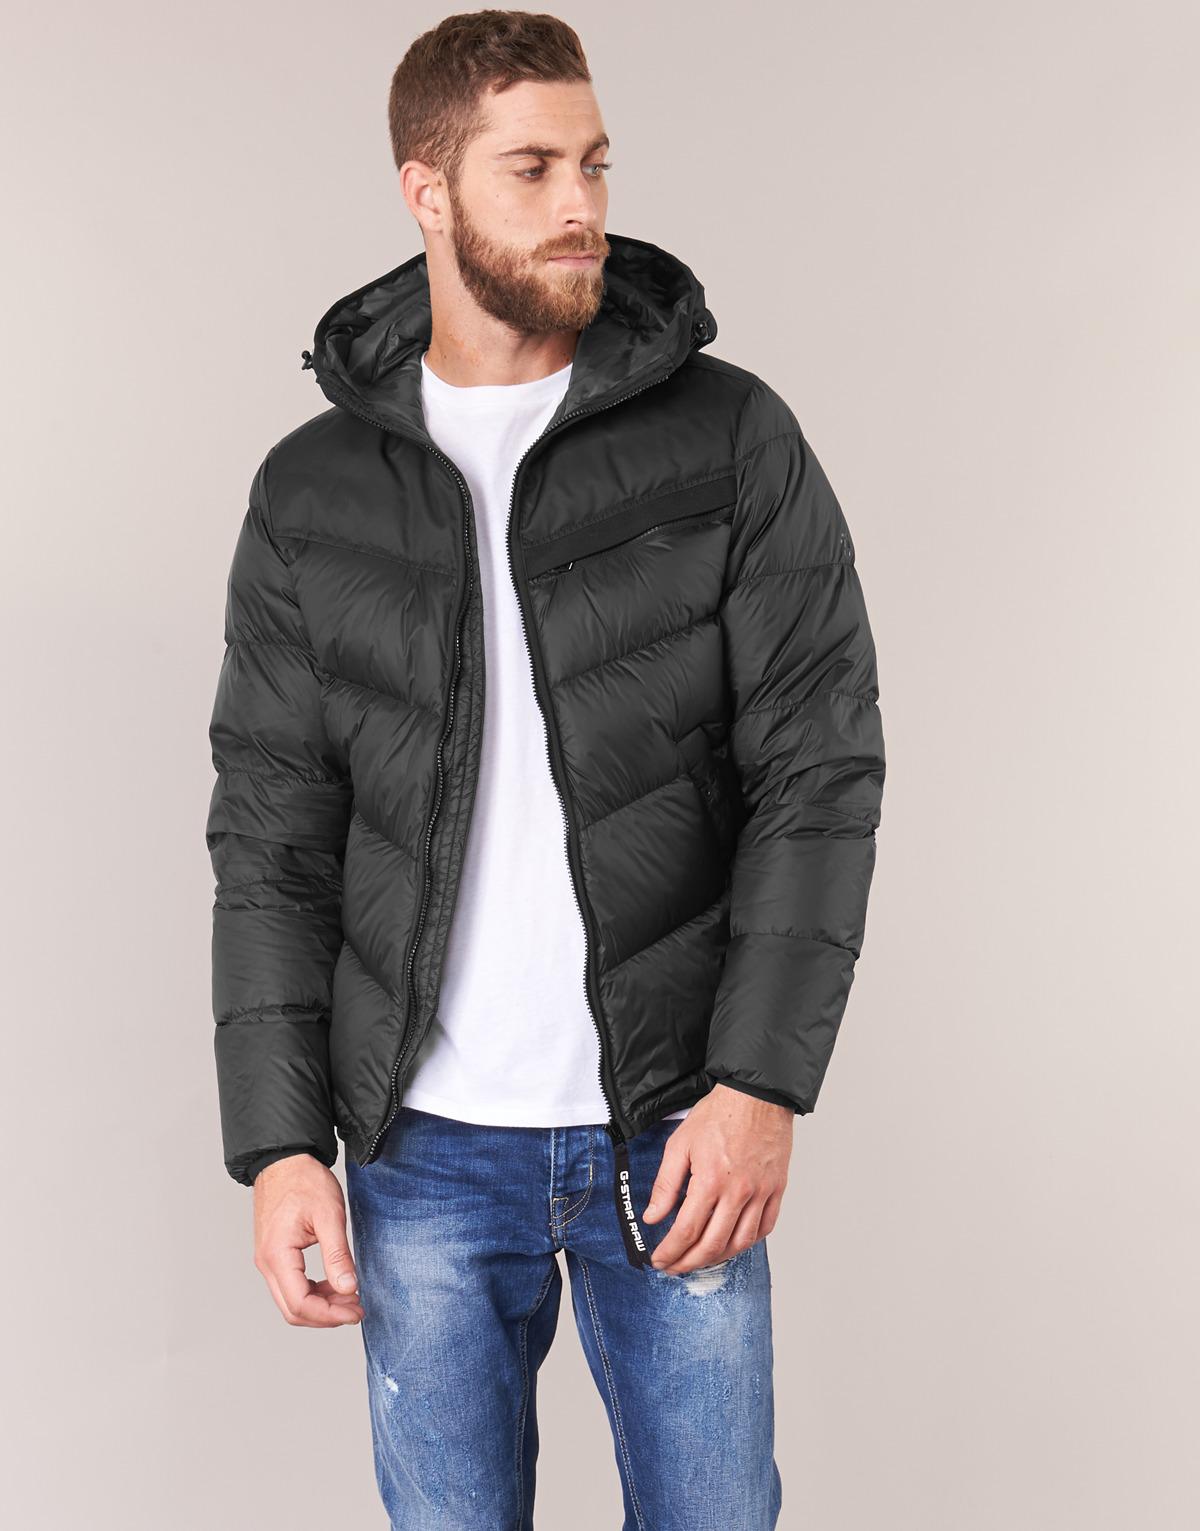 G-STAR RAW Mens Attacc Heatseal Quilted HDD JKT Jacket